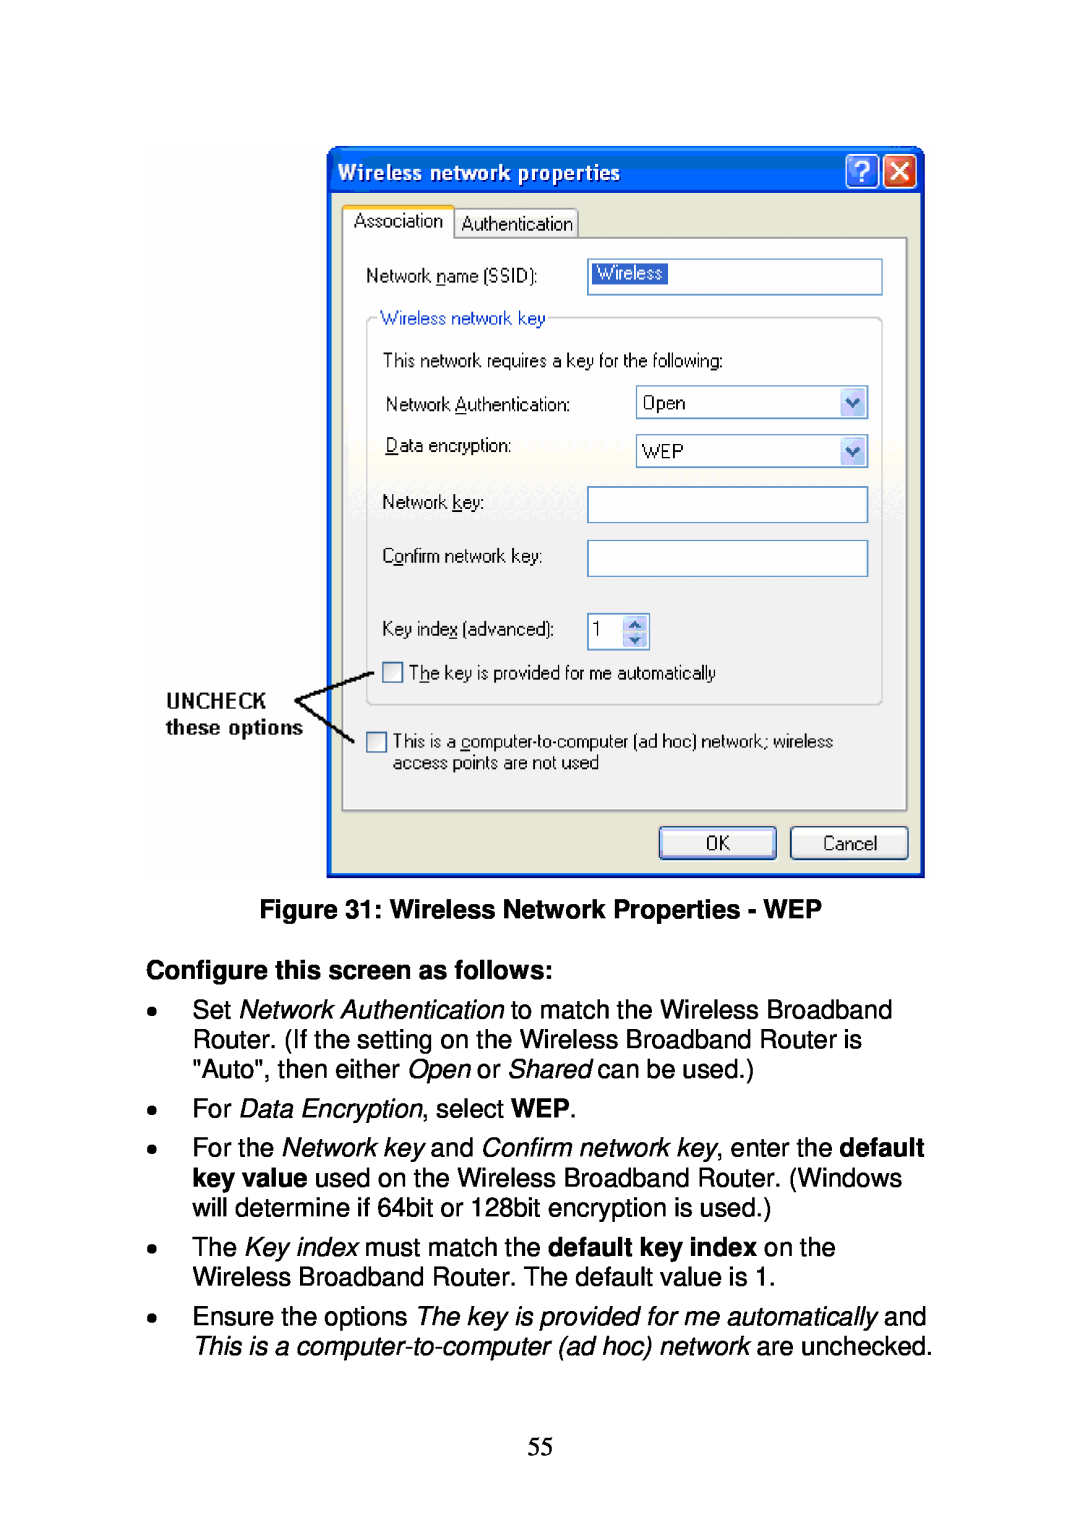 3Com WBR-6000 Wireless Network Properties - WEP, Configure this screen as follows, For Data Encryption, select WEP 